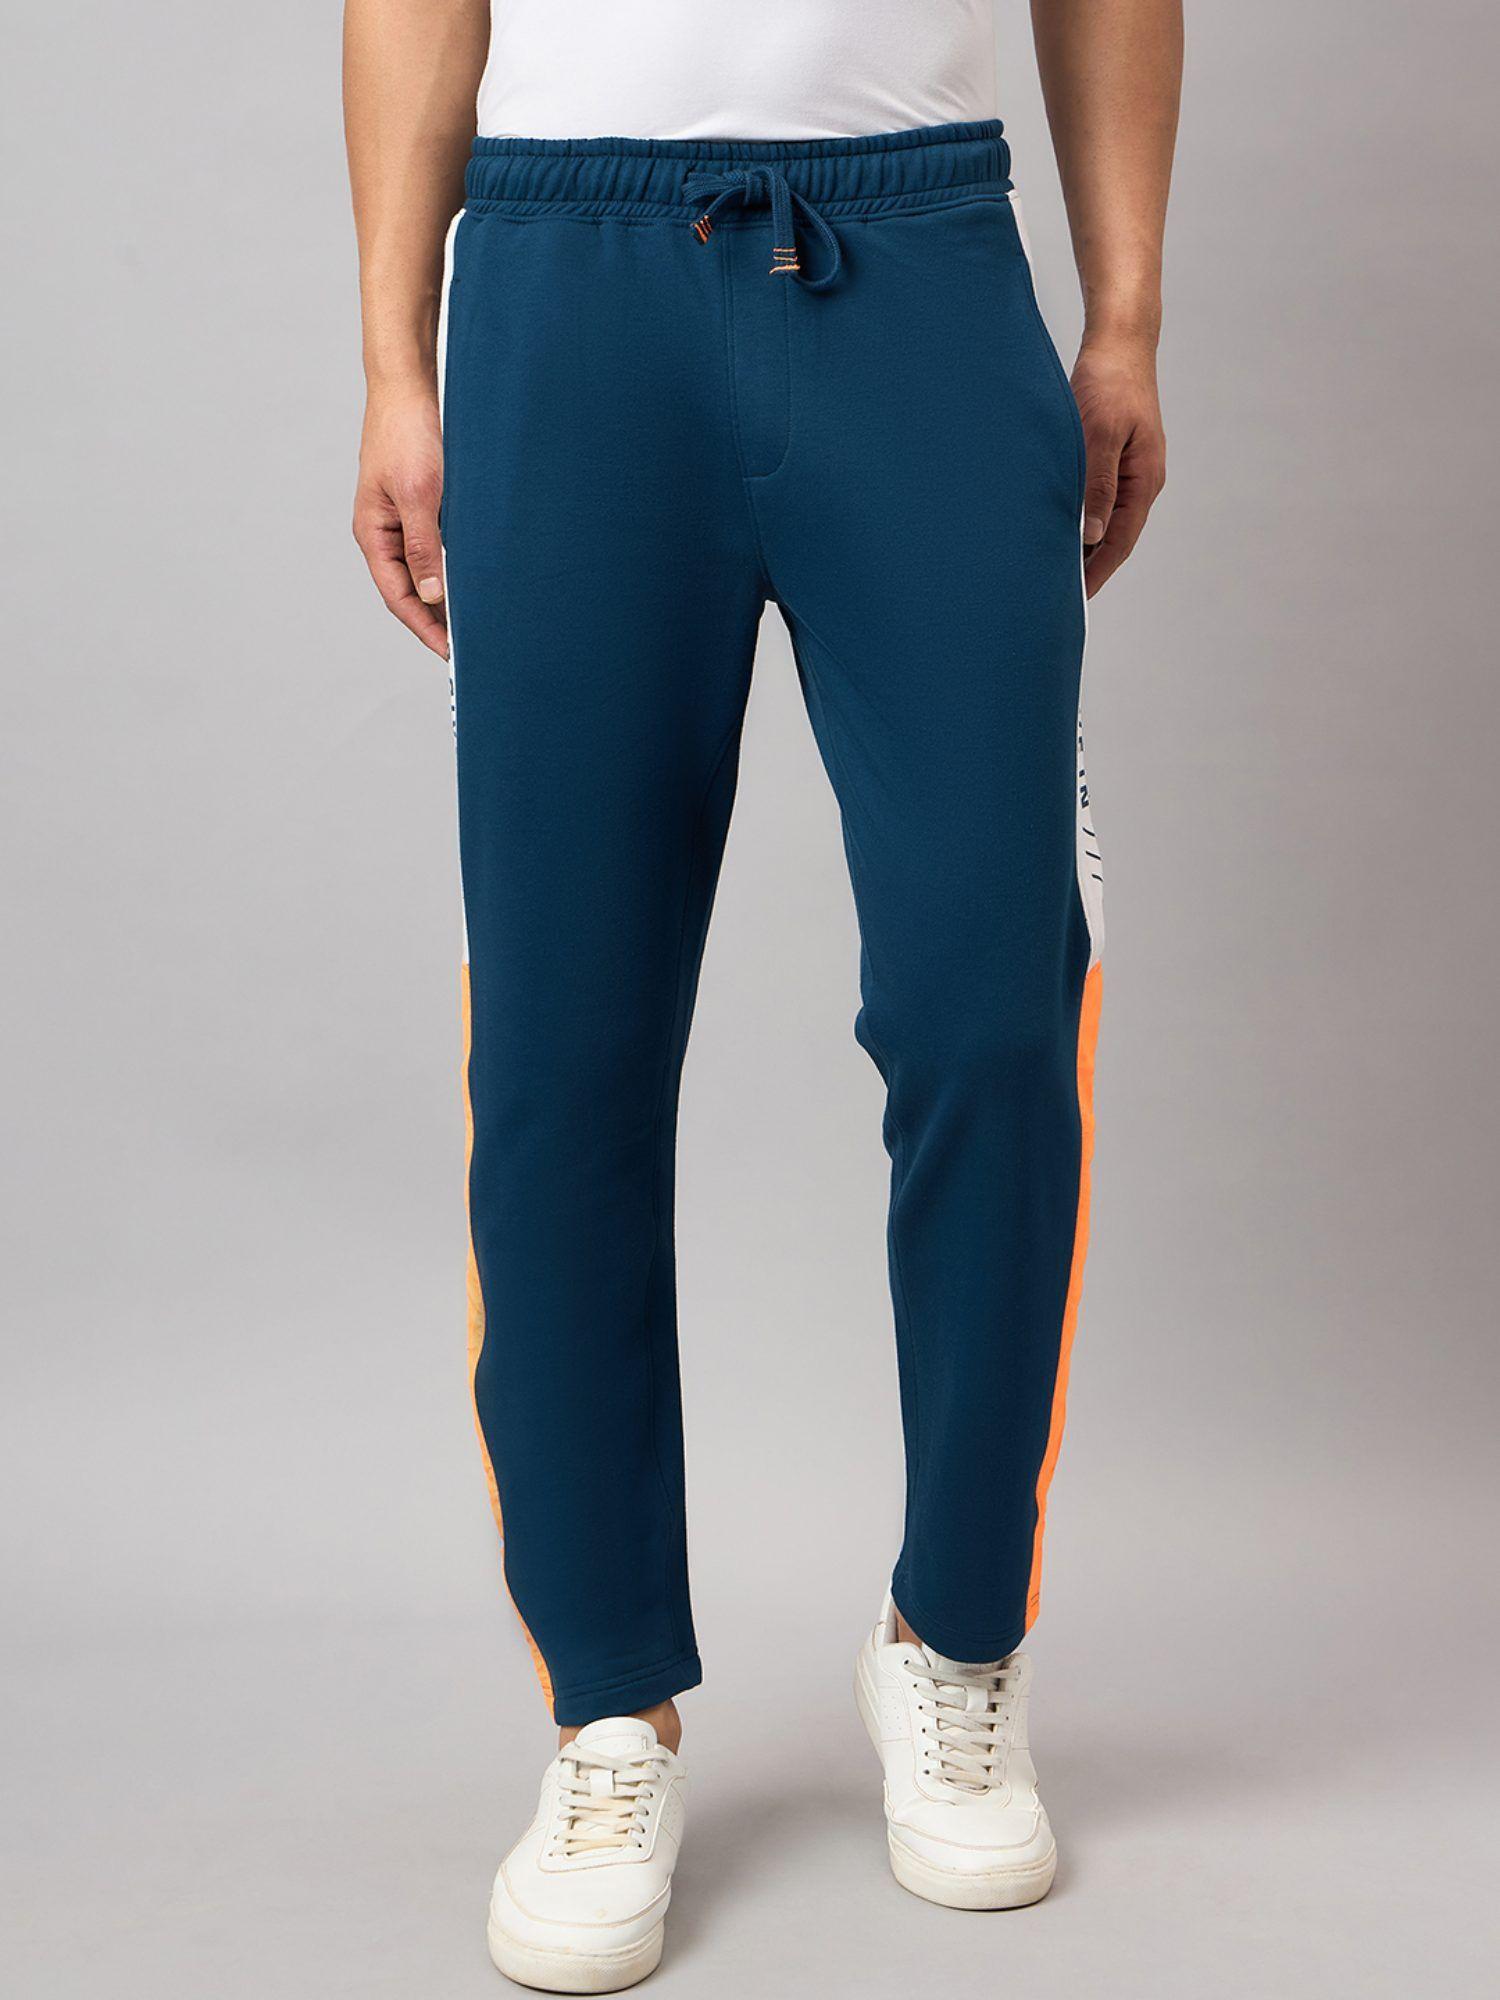 blue colorblocked track pant